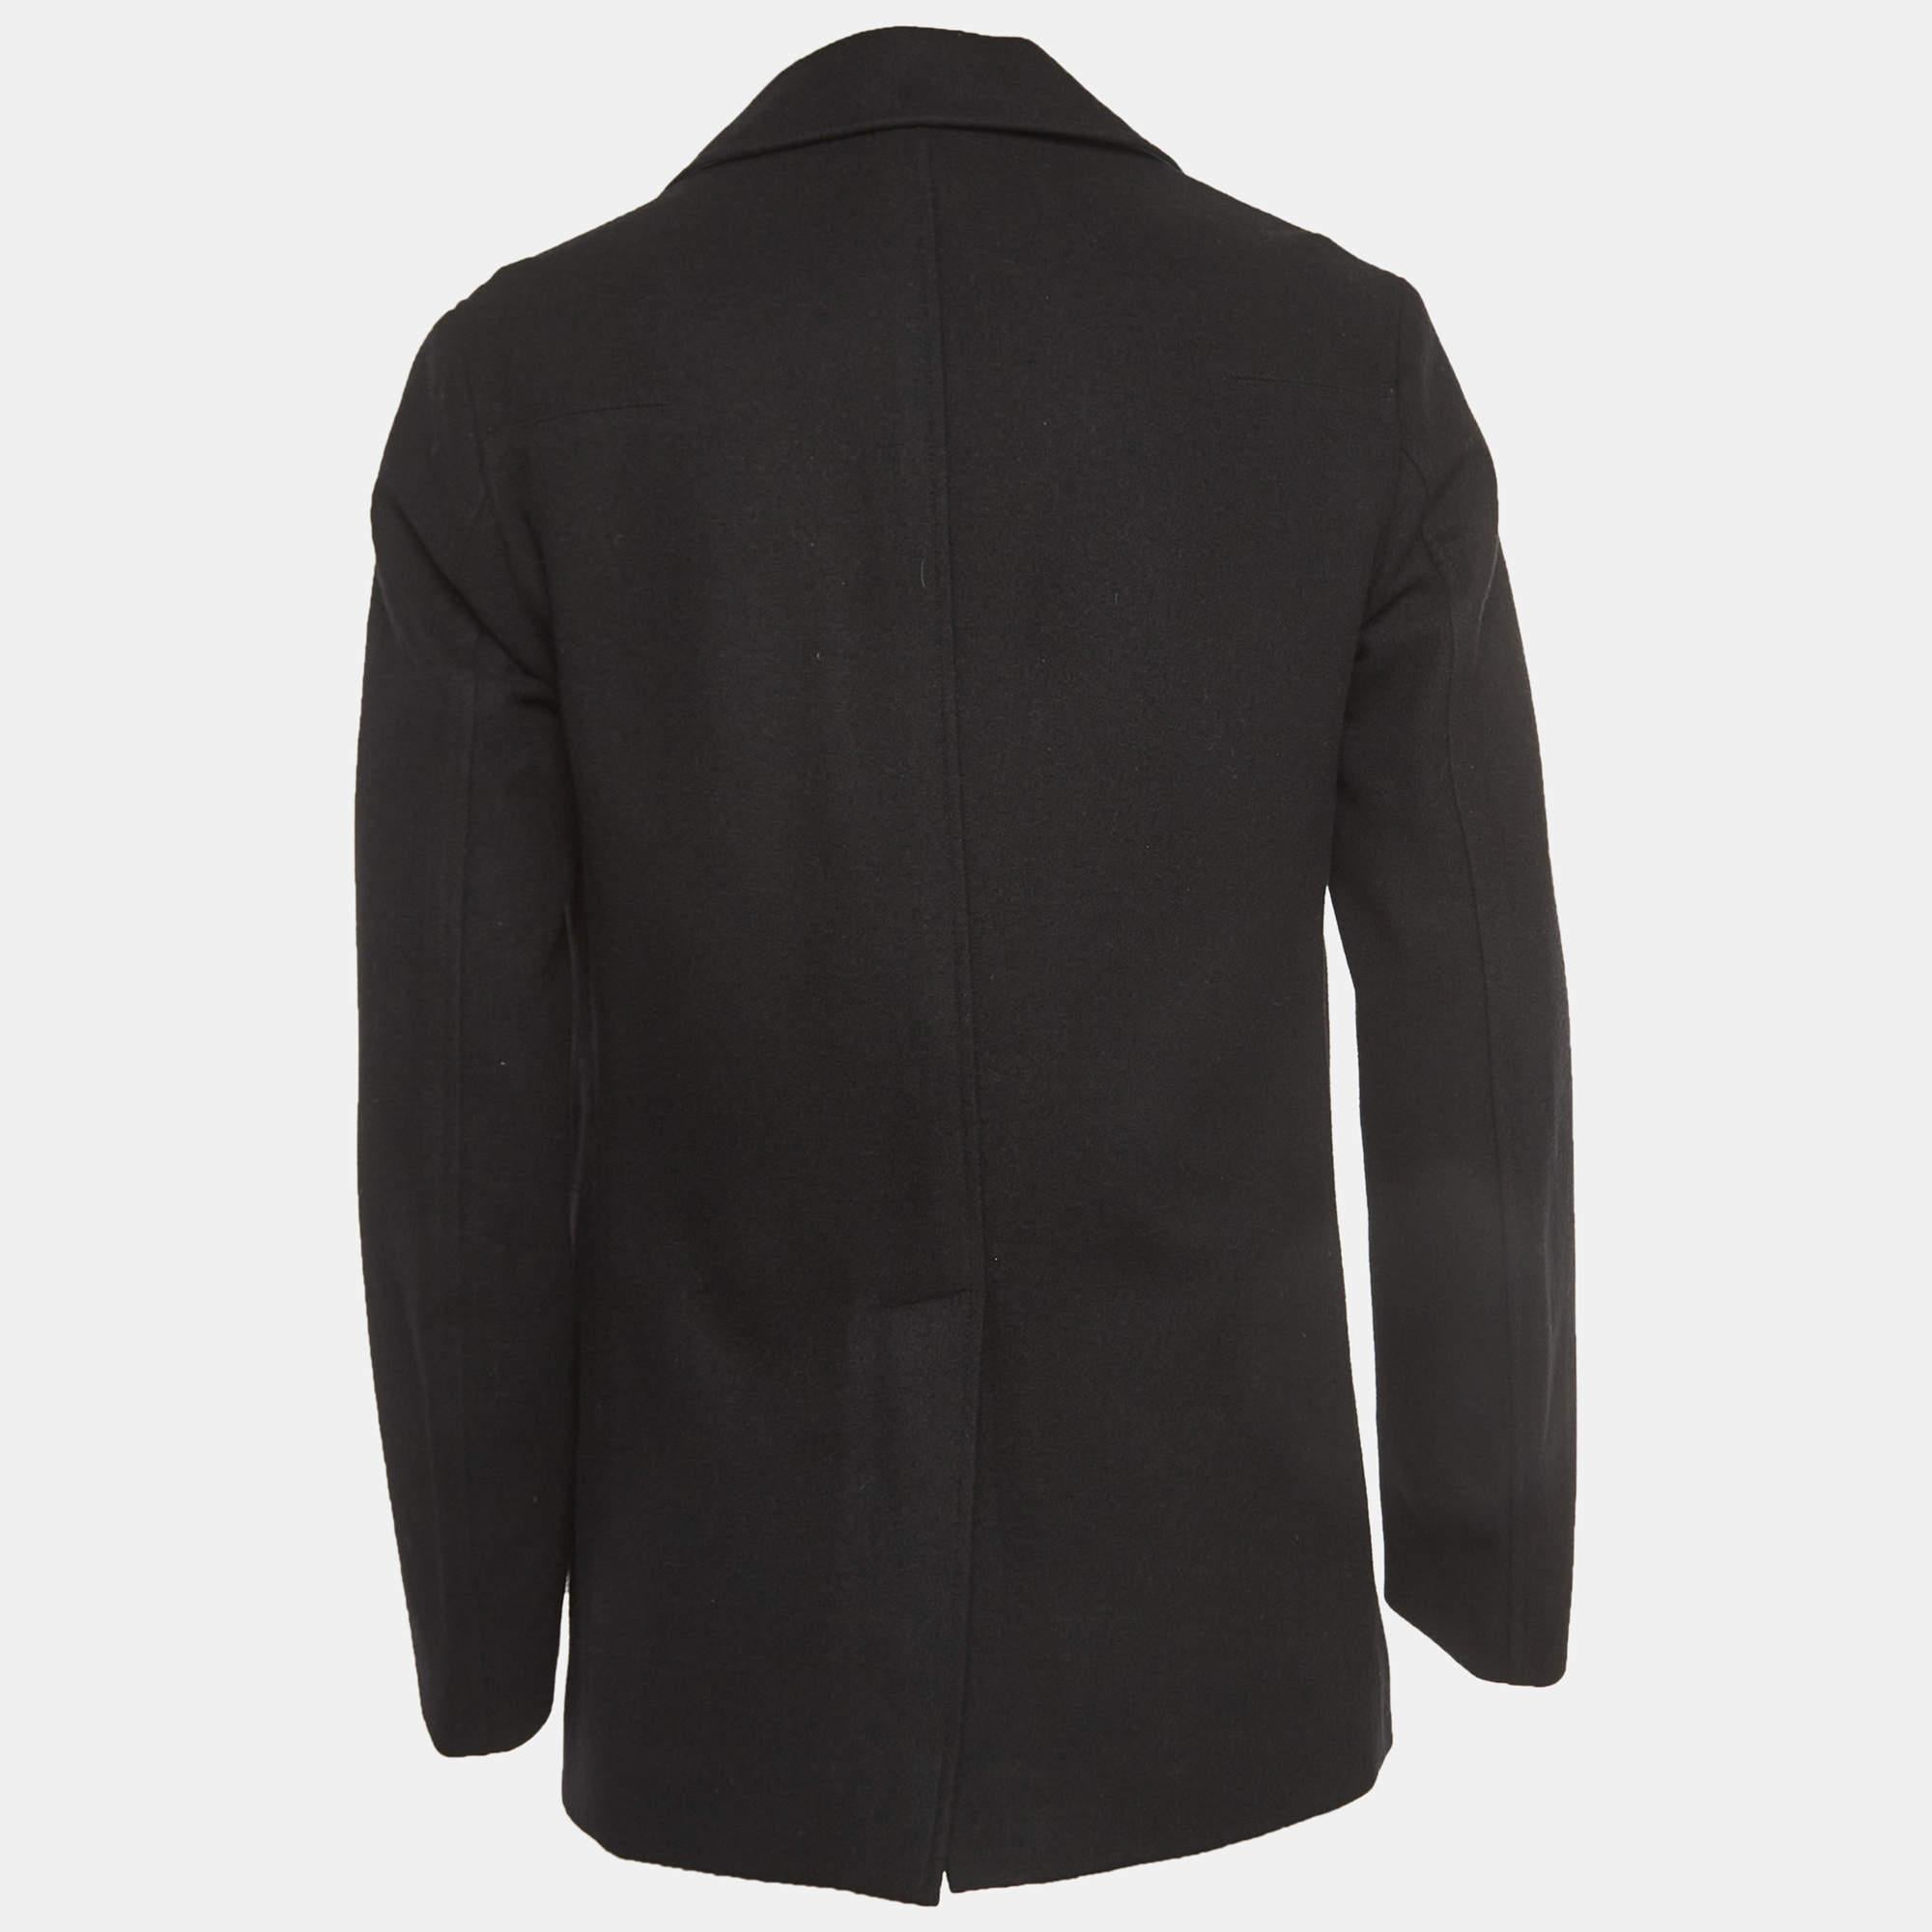 Crafted by Dior Homme, this exquisite black wool double-breasted coat exudes sophistication and elegance. Its tailored silhouette accentuates the wearer's form, while the luxurious wool fabric provides warmth and style. Perfect for any occasion,